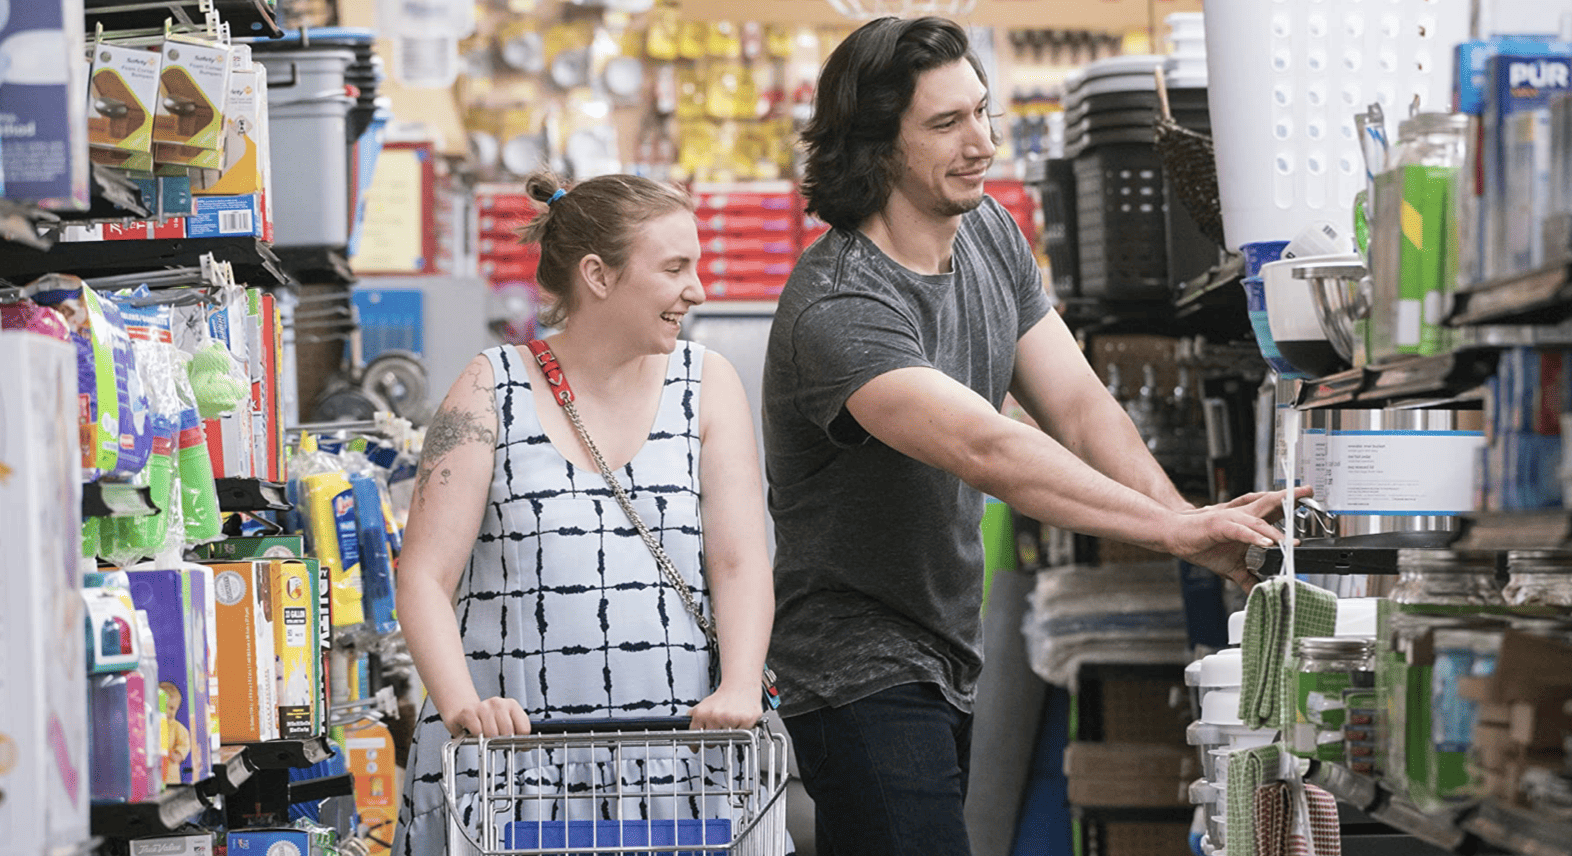 Hannah and Adam pushing a cart in a store in this image from Apatow Productions